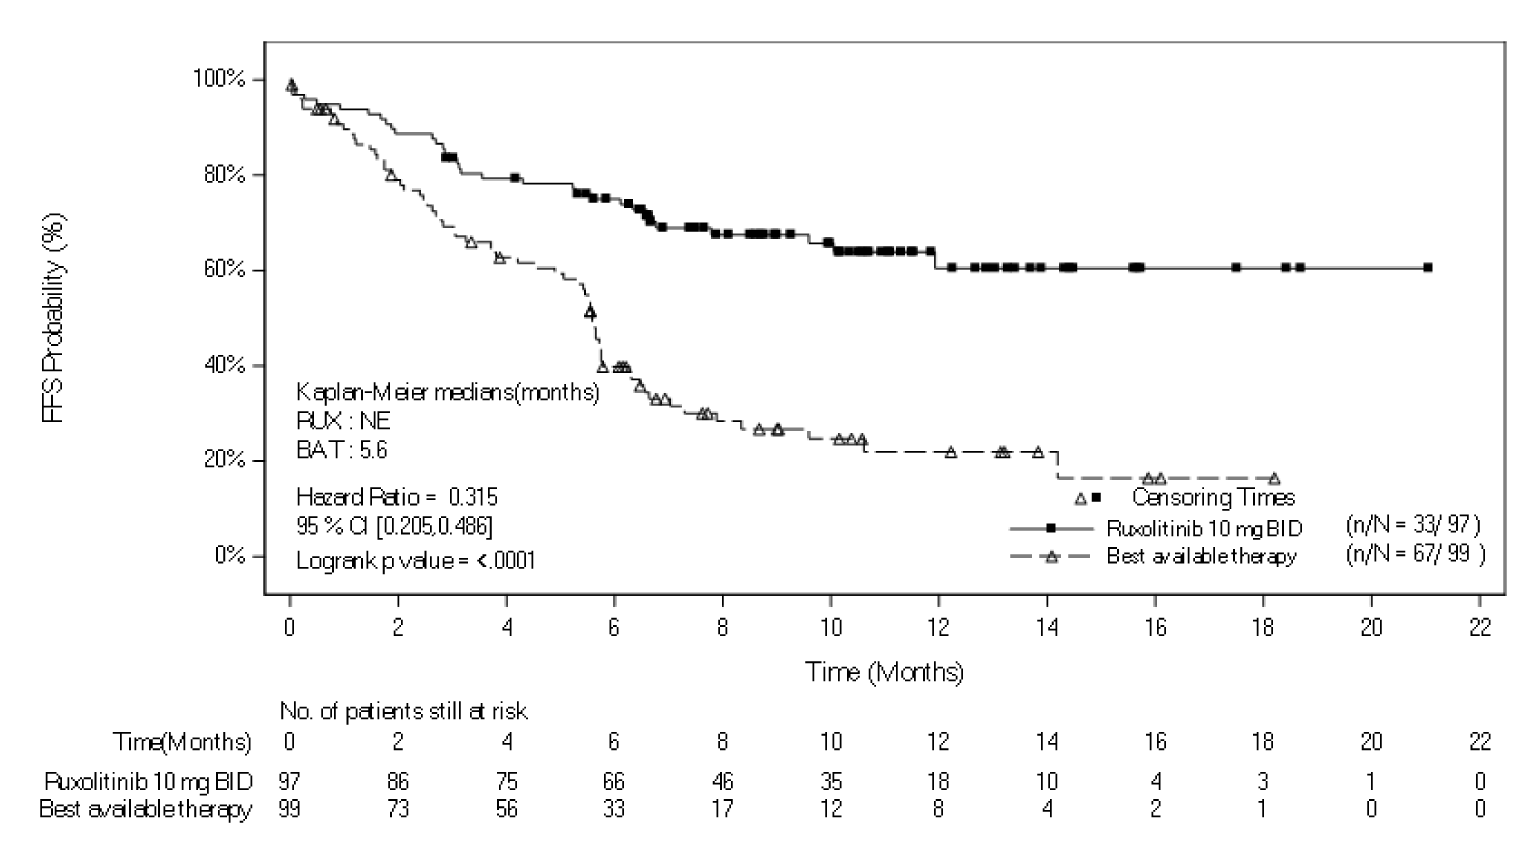 At the interim analysis, the Kaplan–Meier curves of FFS for patients in the ruxolitinib and BAT groups decreased over time. The slope of the curve was steeper for the BAT group. The 2 curves started to diverge at about 1 month. There was a visible drop in the BAT curve around 6 months. A plateau was visible at about 6 months in the ruxolitinib group and at about 10.5 months in the BAT group. The curve for ruxolitinib ended at about 21 months and the curve for BAT ended at about 18 months.